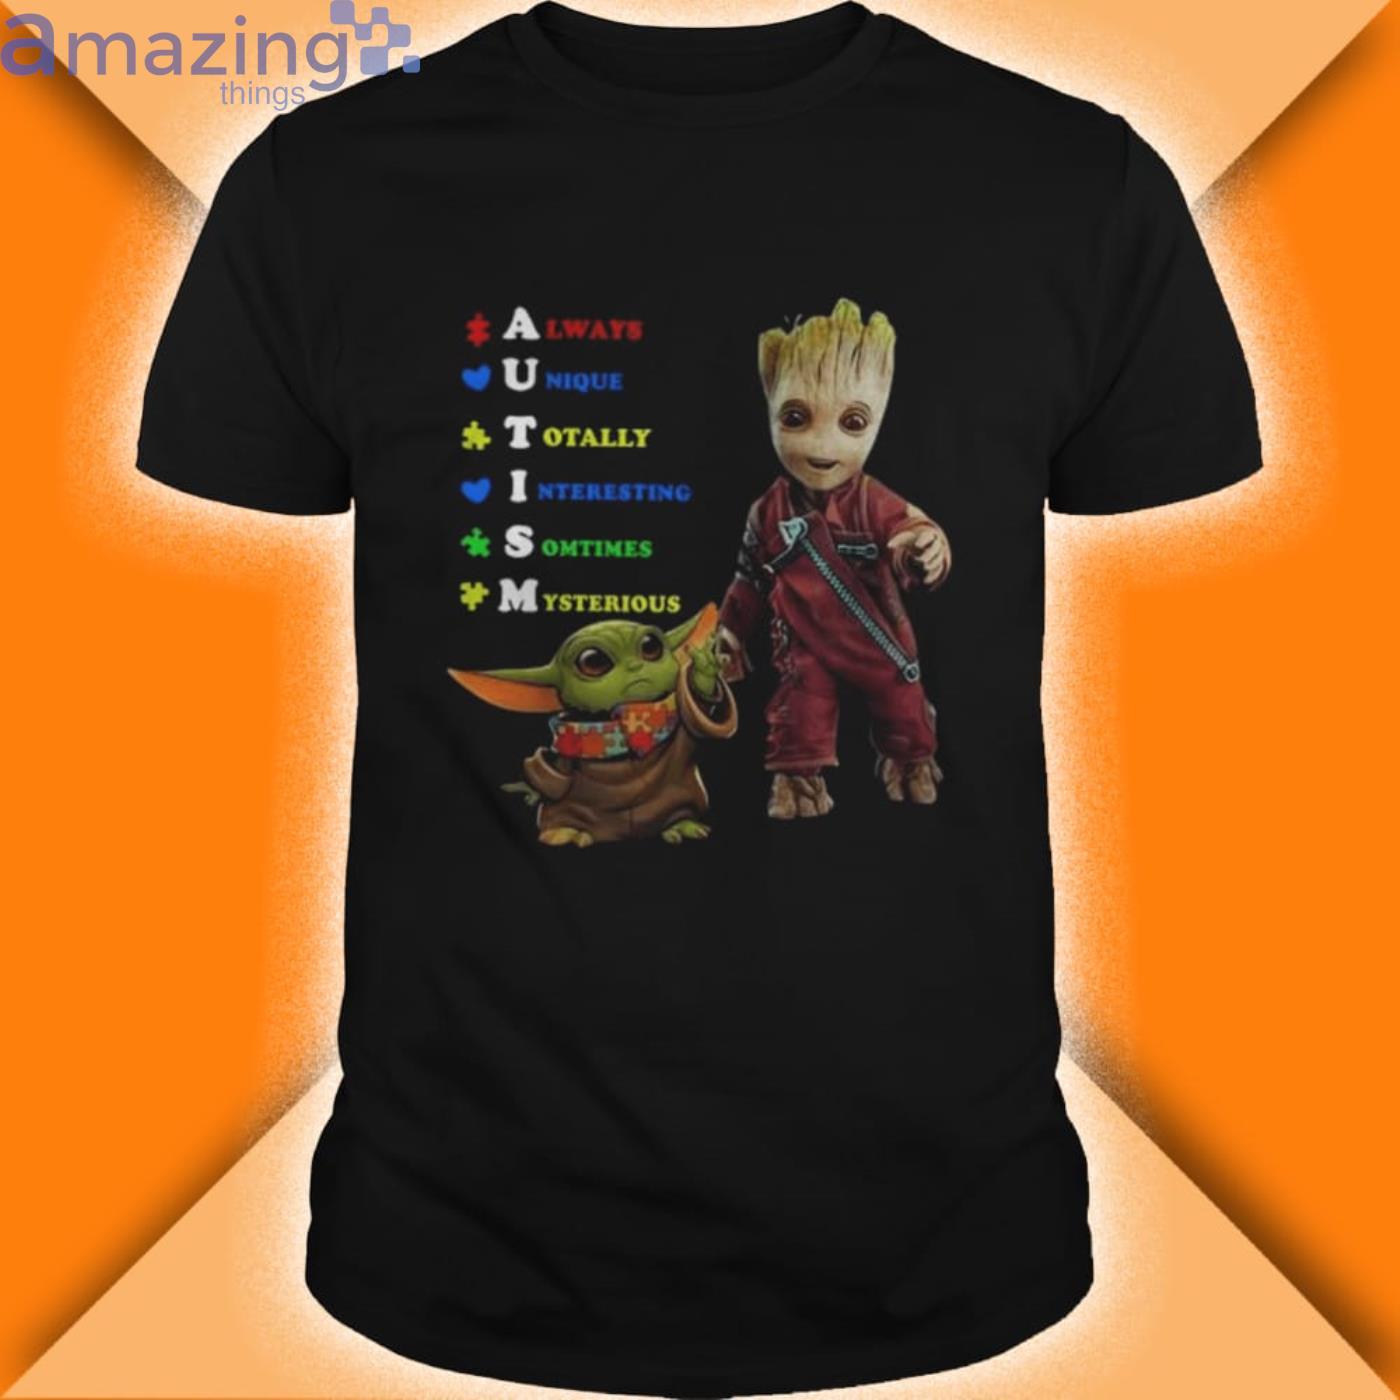 Baby Groot And Yoda Autism Always Unique Totally Interesting Sometimes Mysterious Shirt Product Photo 1